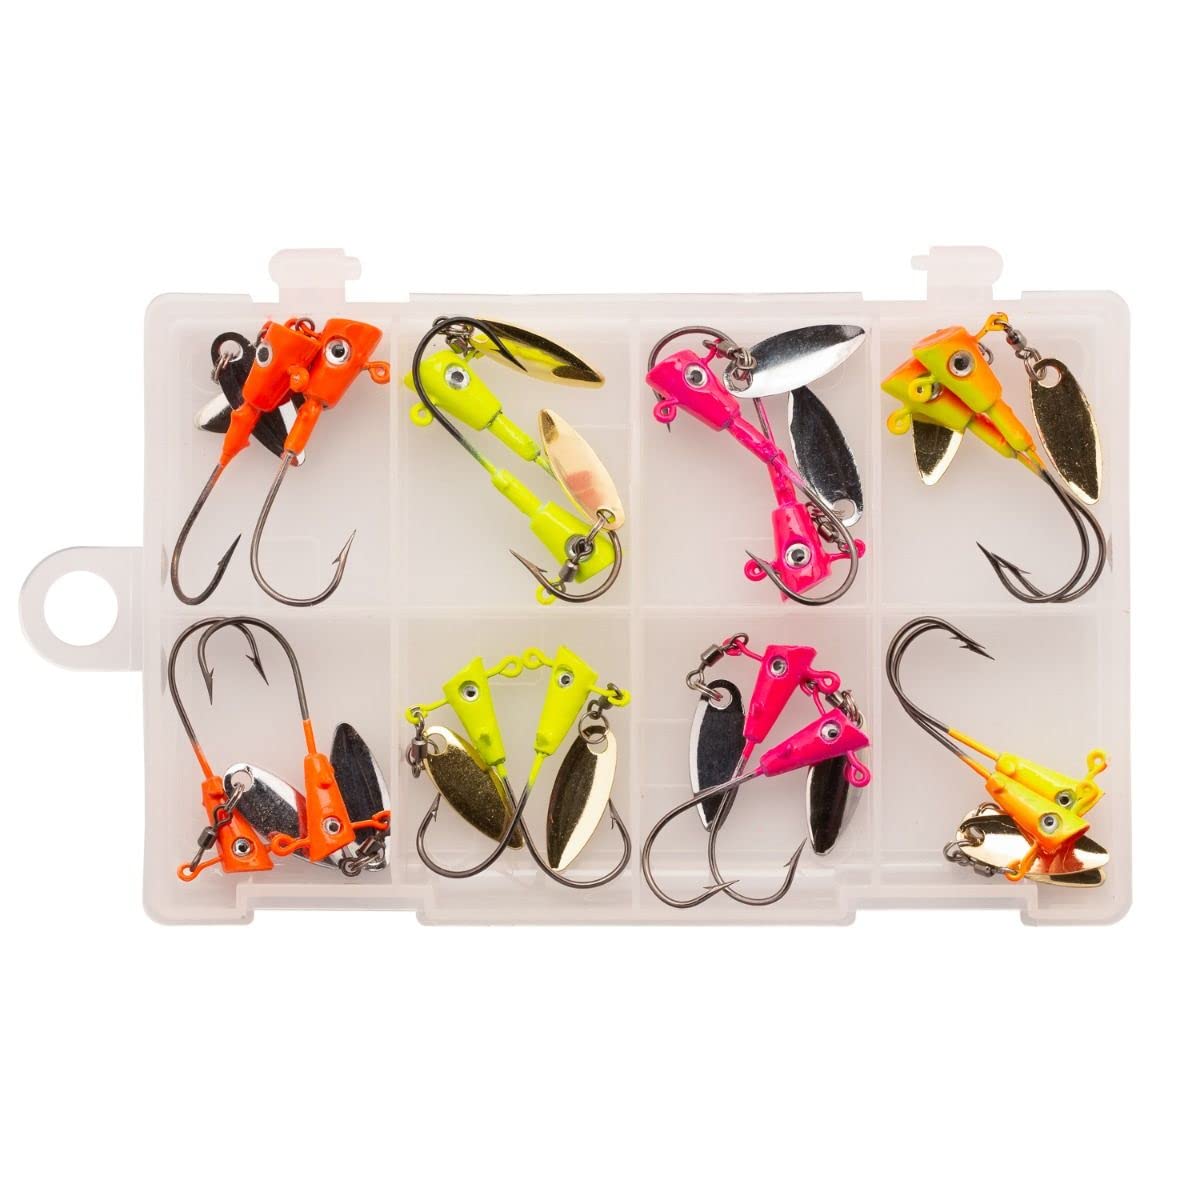 Crappie Magnet Fin Spin Kit, Freshwater Fishing Equipment and Accessories,  8 Size 1/8 Jig Heads, and 8 Size 1/16 Jig Heads